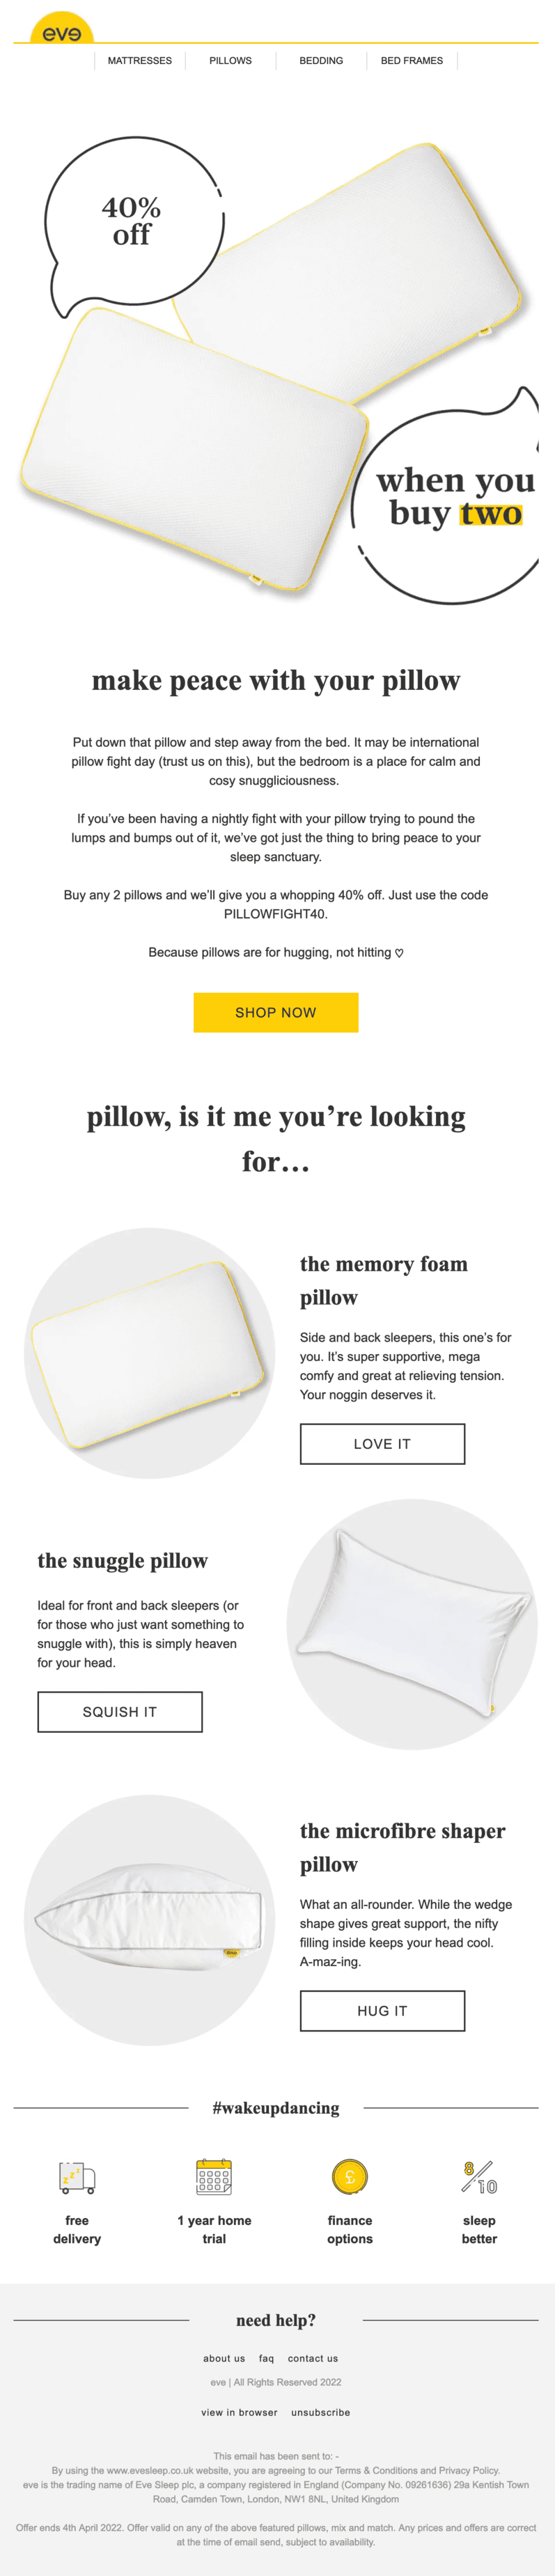 An email encouraging readers to stop fighting with their pillows and instead hug them and offering a discount